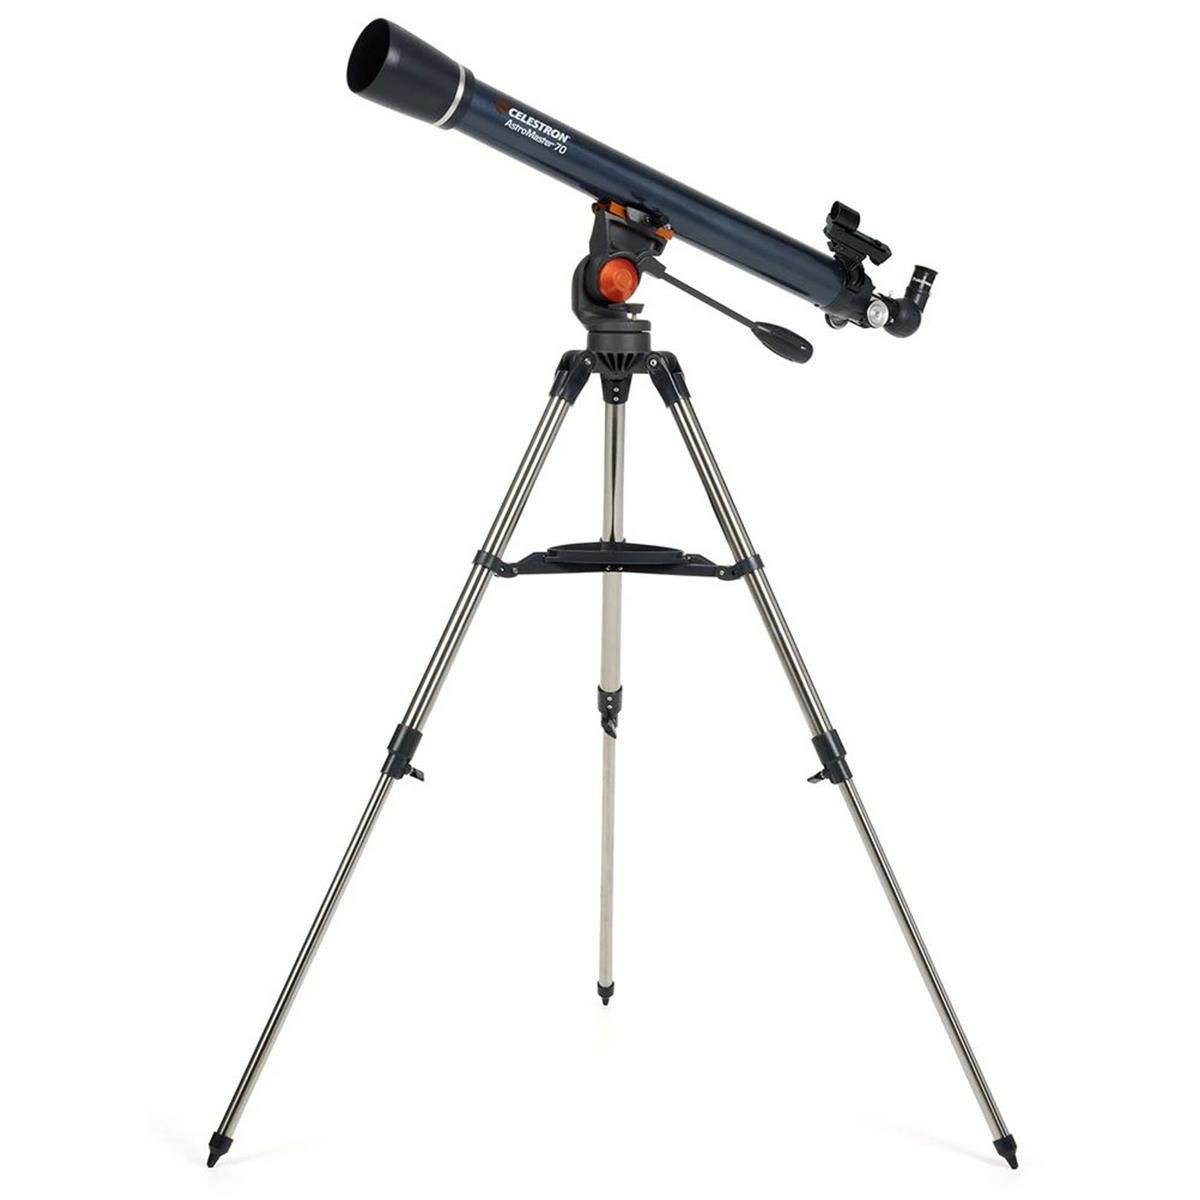 Image of Celestron AstroMaster 70AZ 70mm f/13 Refractor Telescope with Alt Azimuth Mount